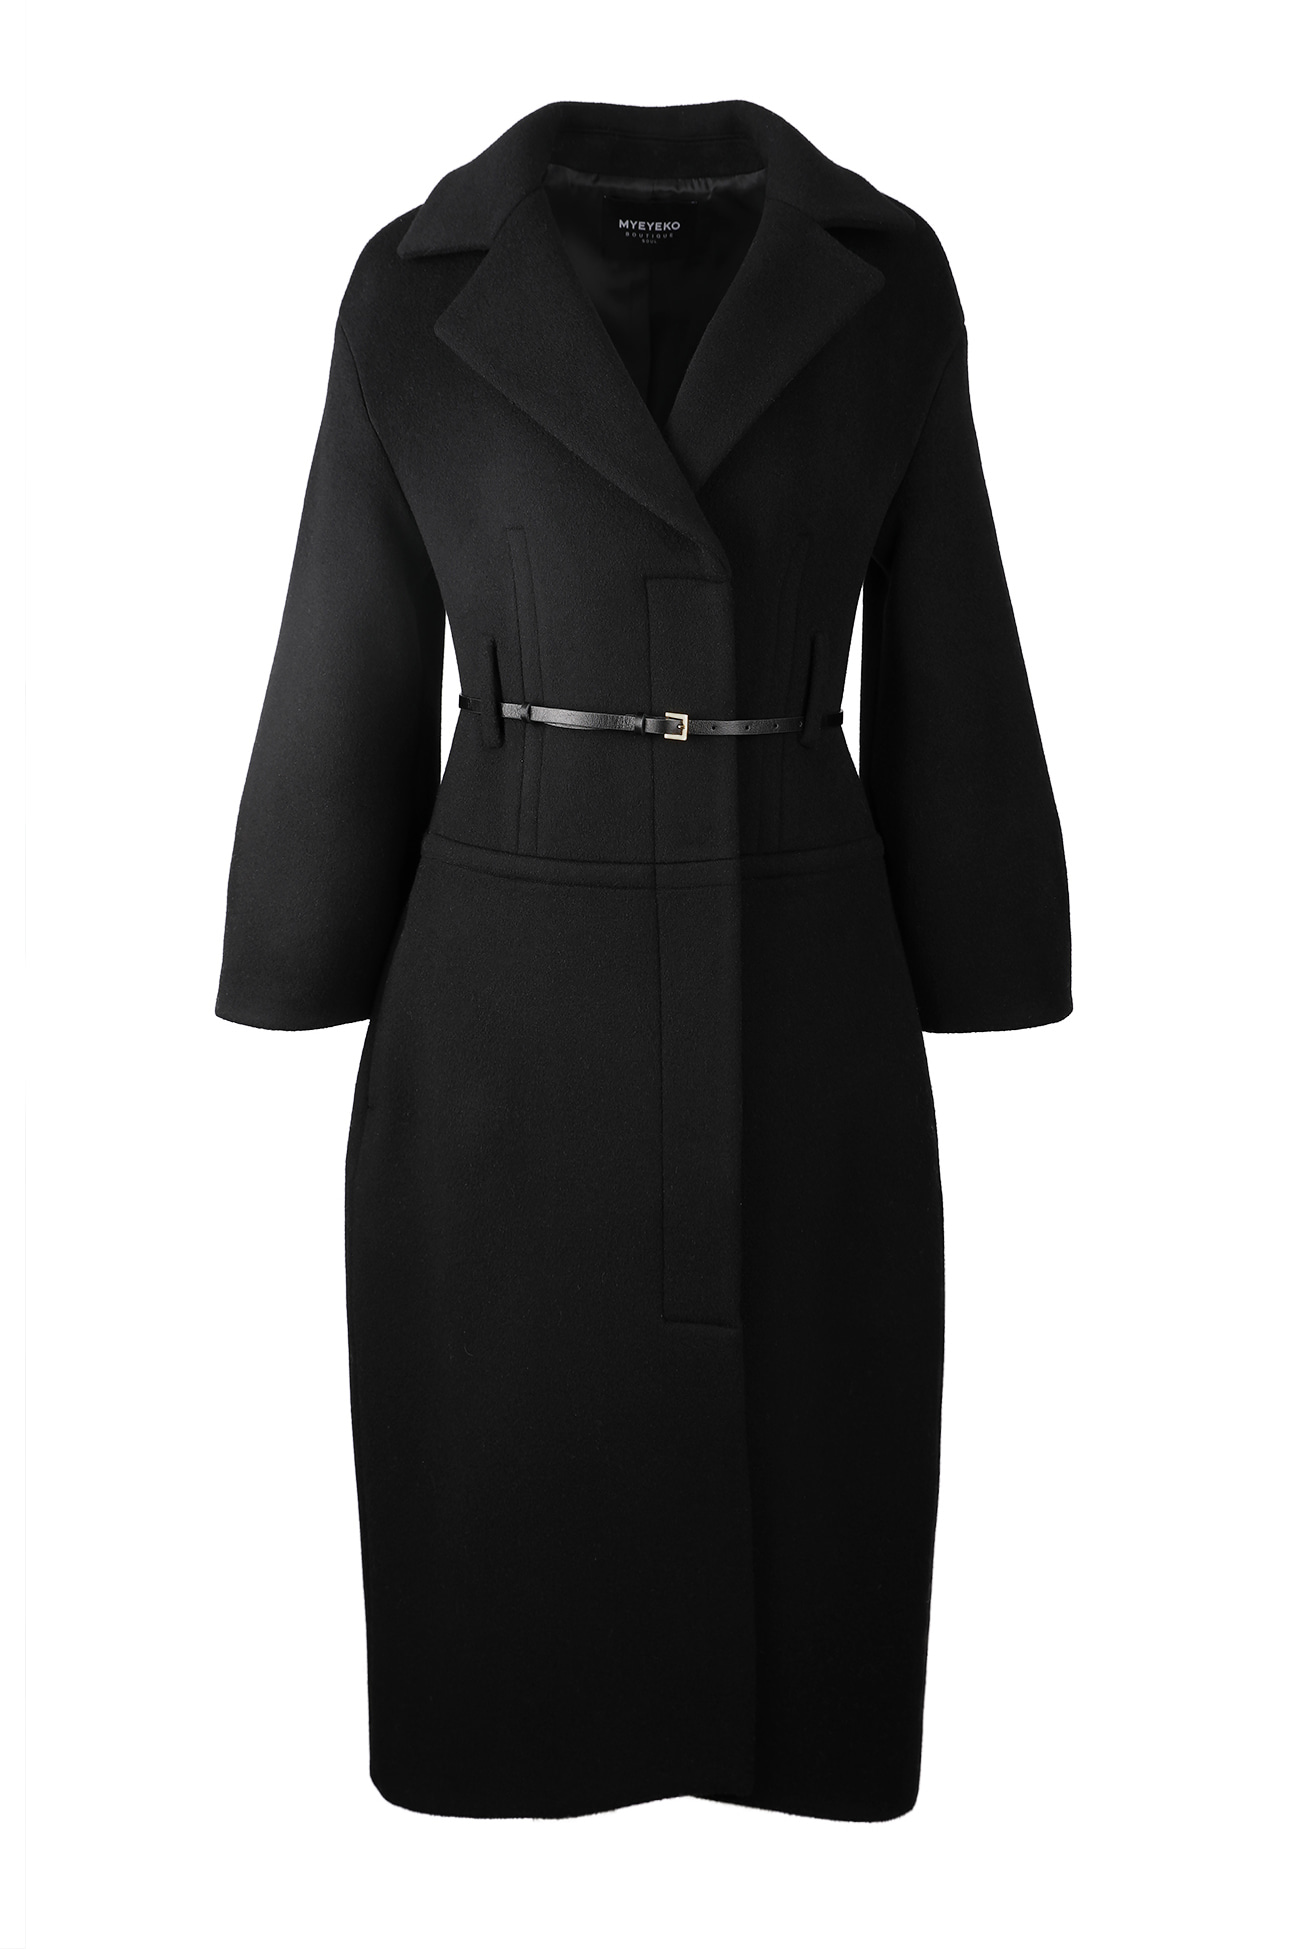 HIGH QUALITY LINE - ELEGANT SILHOUETTE Single-breasted belted coat (블랙)